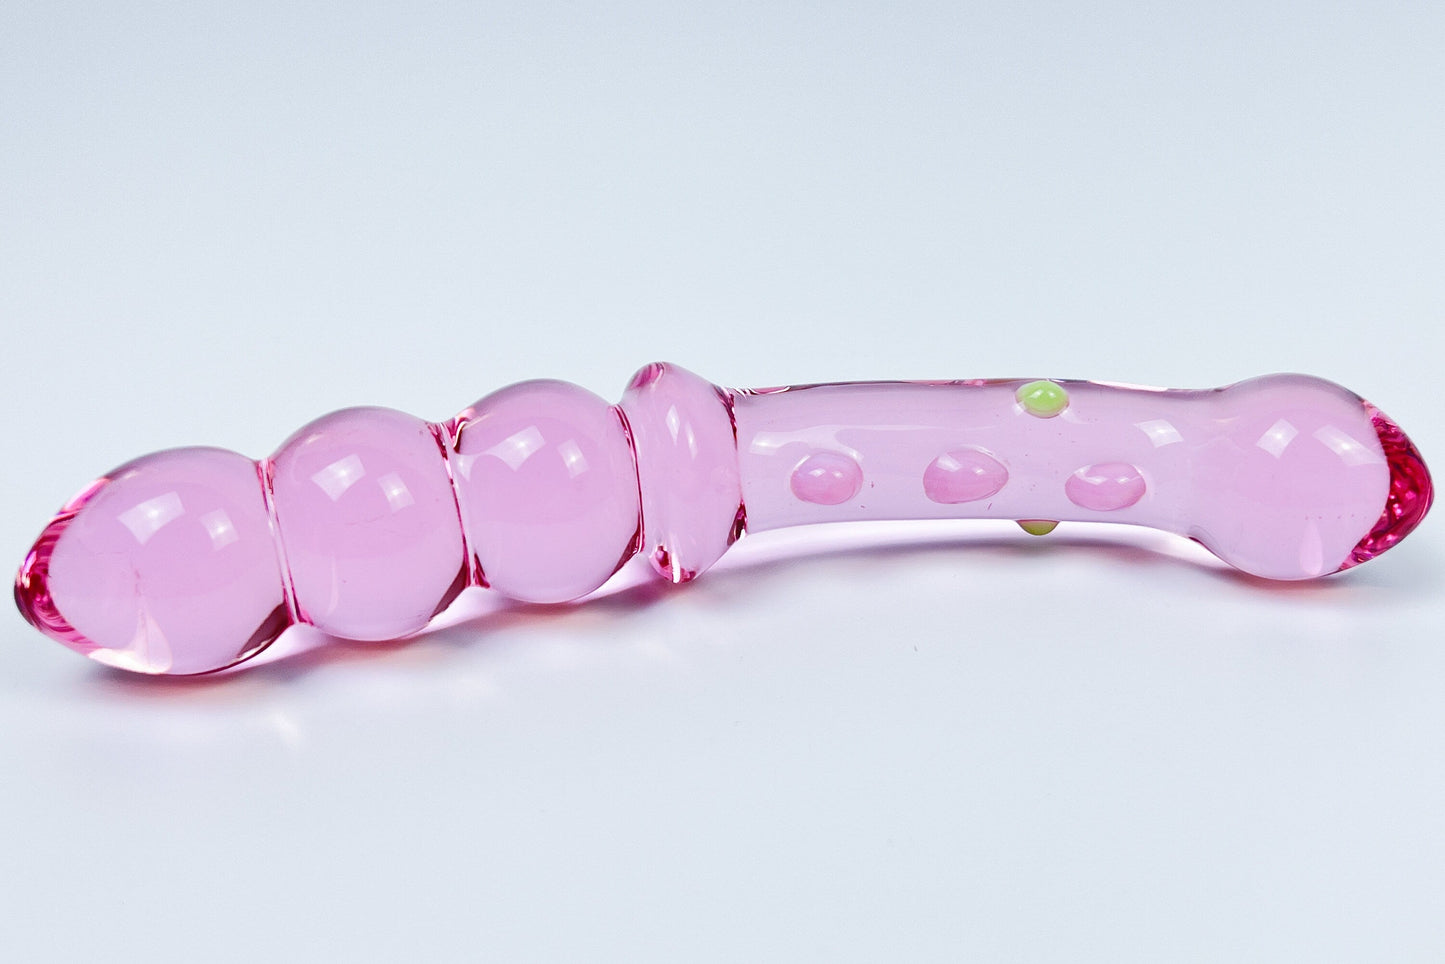 Pink Pleasure Curved Dildos Sensual Pussy Play Sex Toy